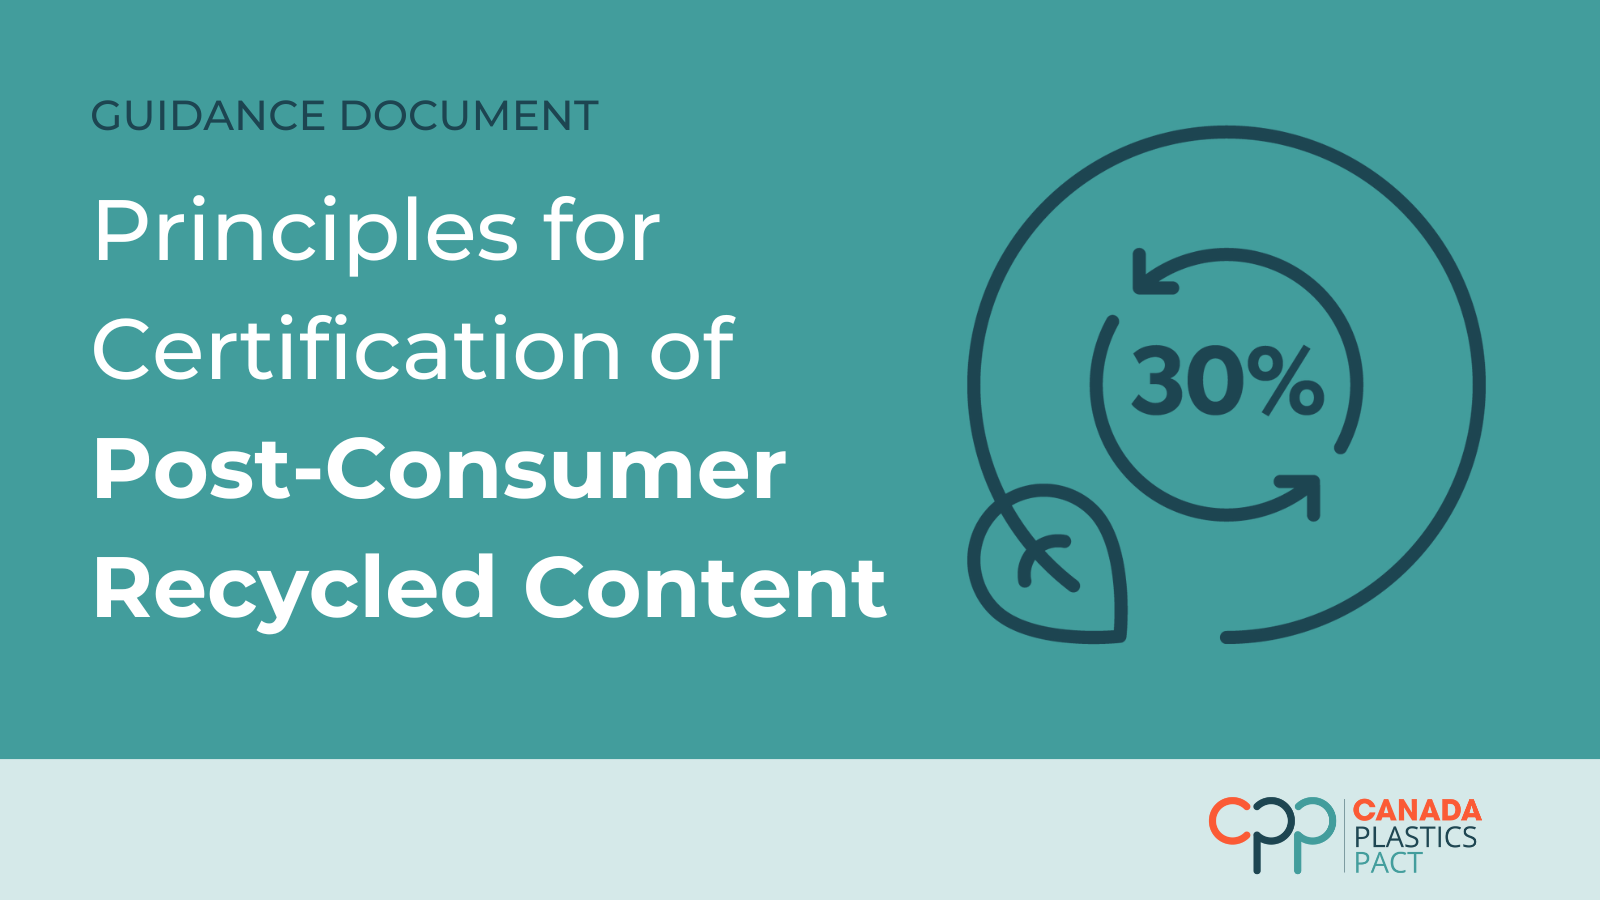 Principles for Certification of Post-Consumer Recycled Content